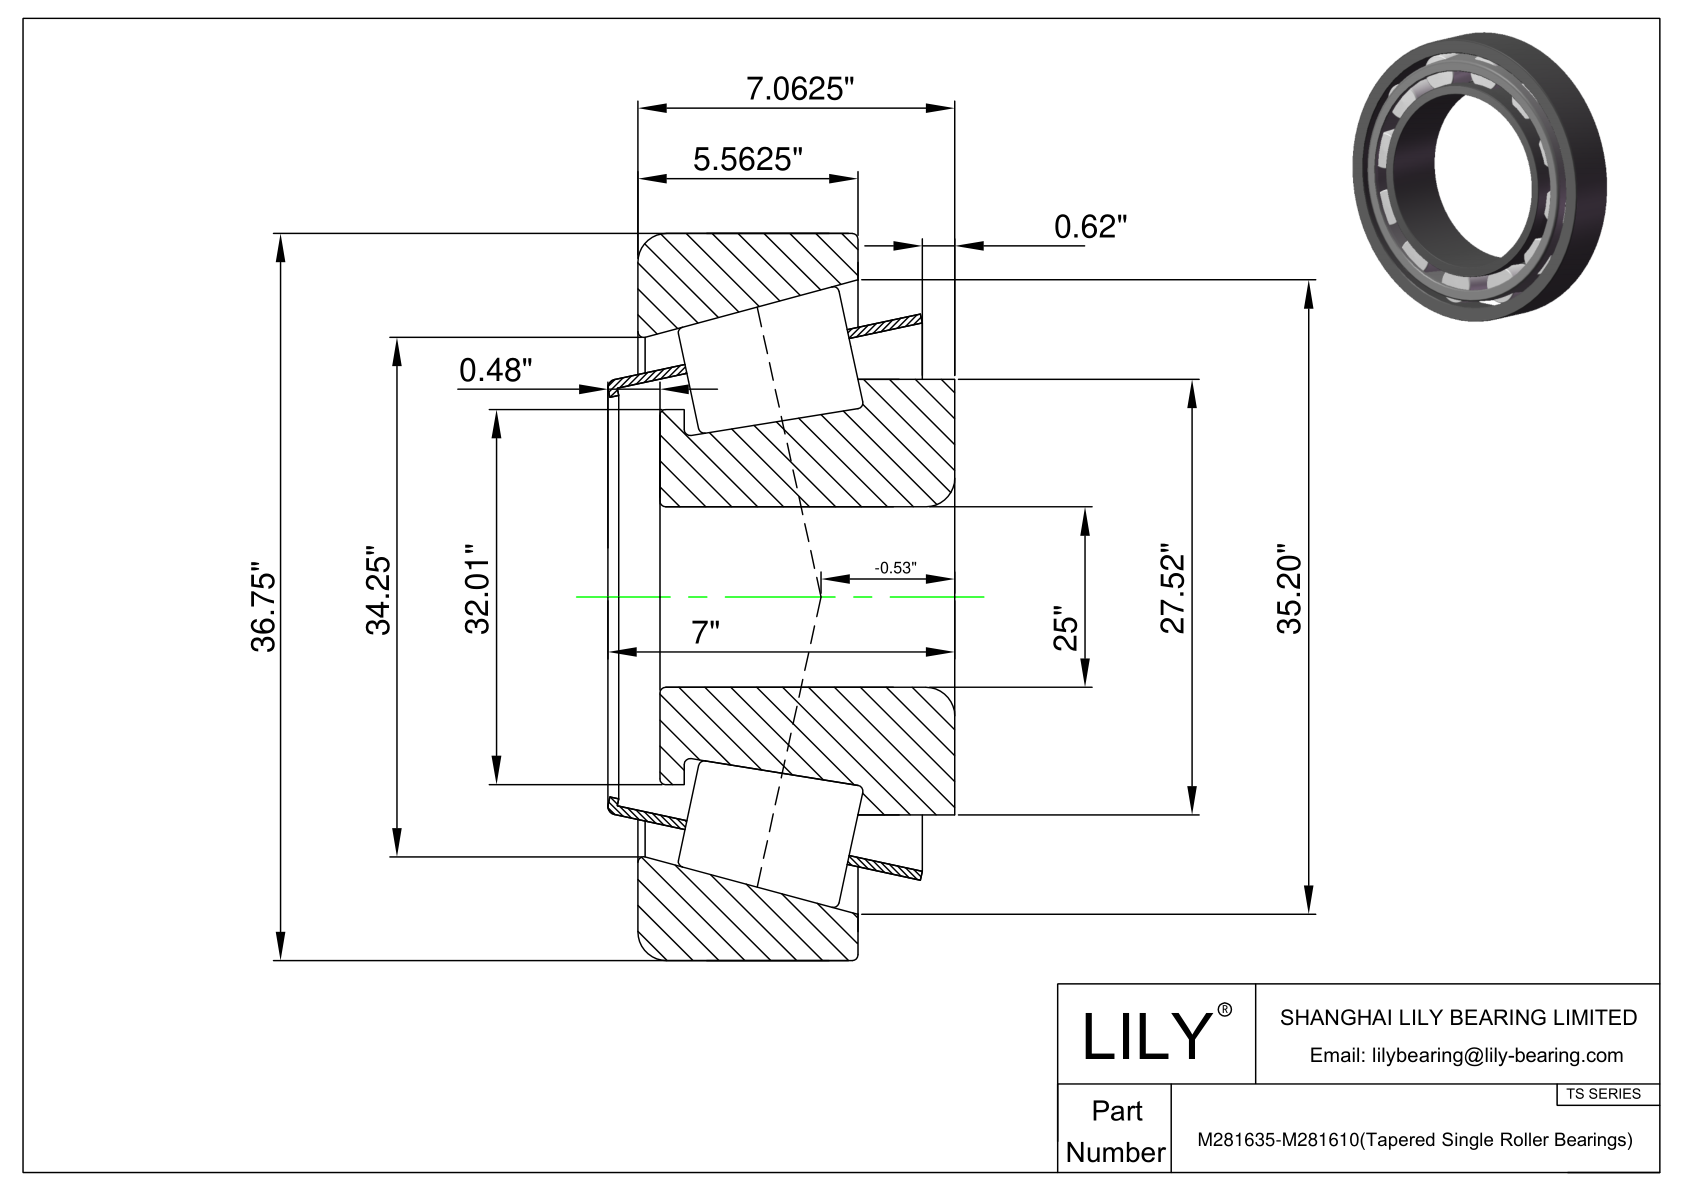 M281635-M281610 TS (Tapered Single Roller Bearings) (Imperial) cad drawing